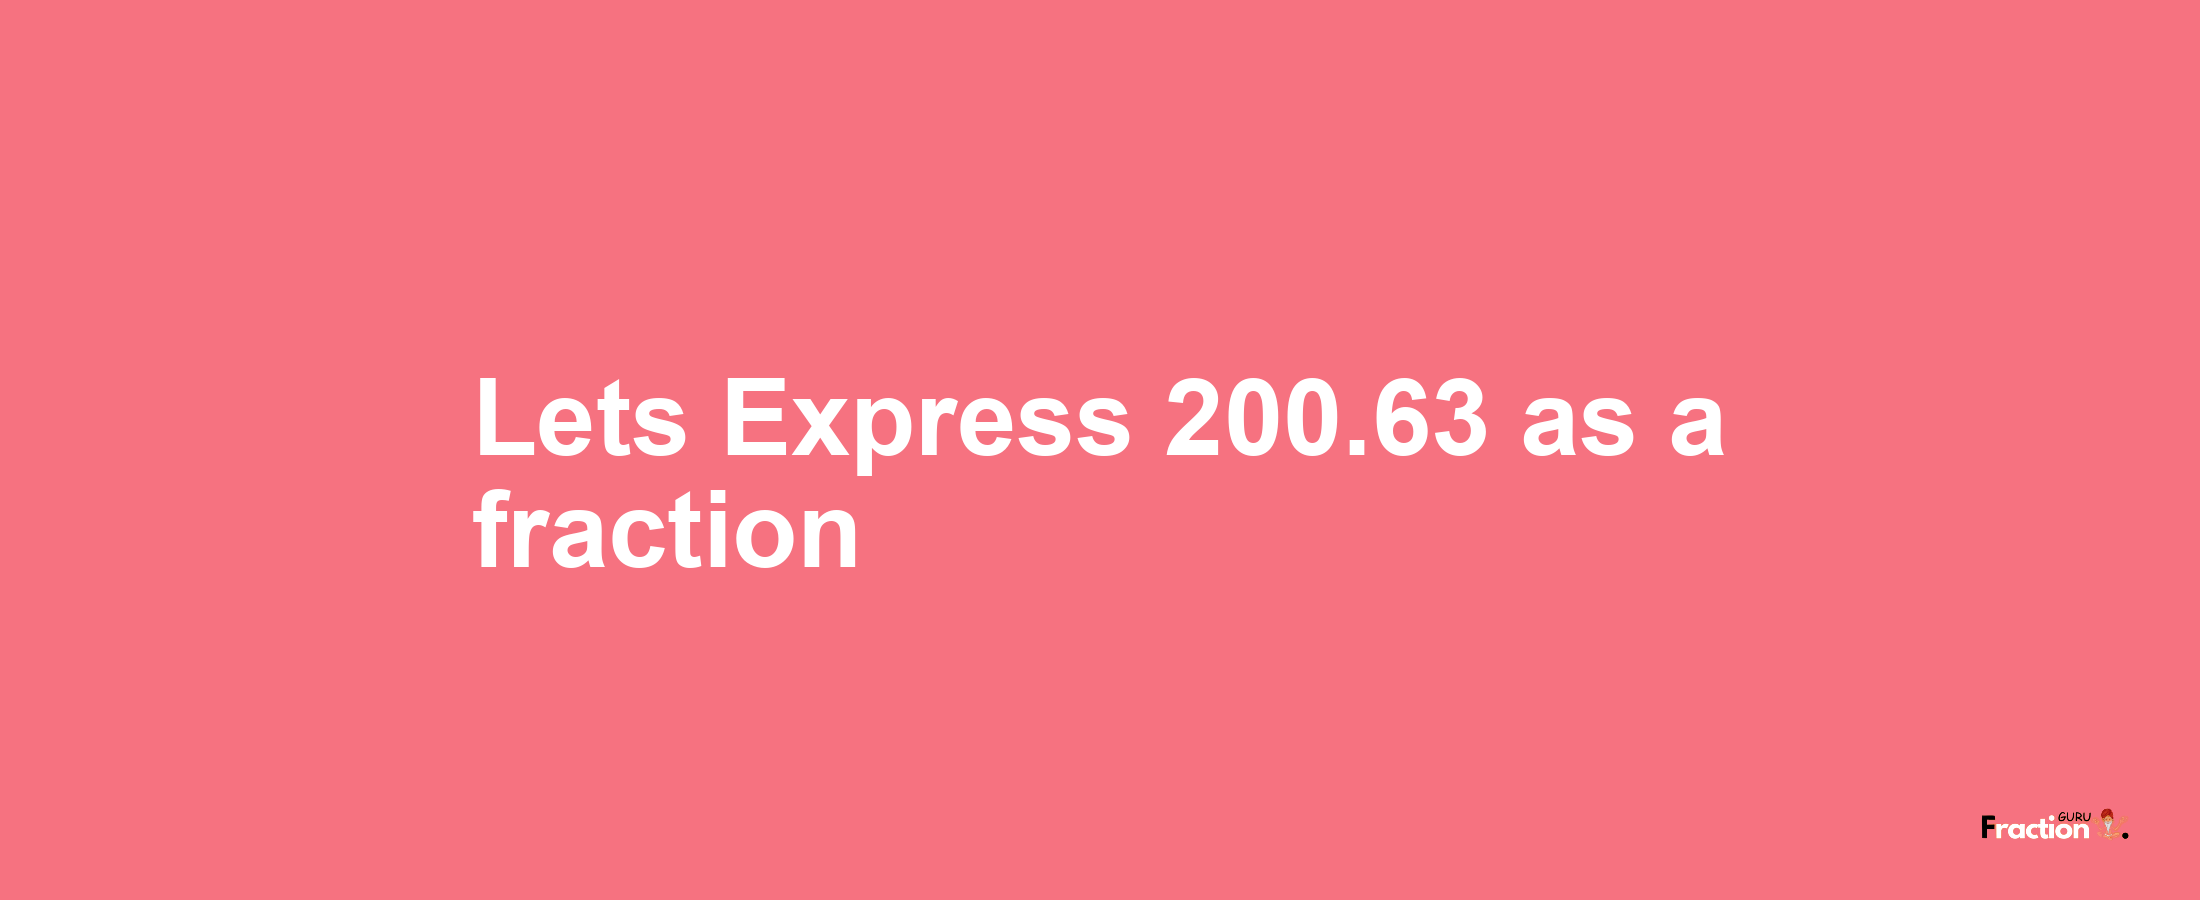 Lets Express 200.63 as afraction